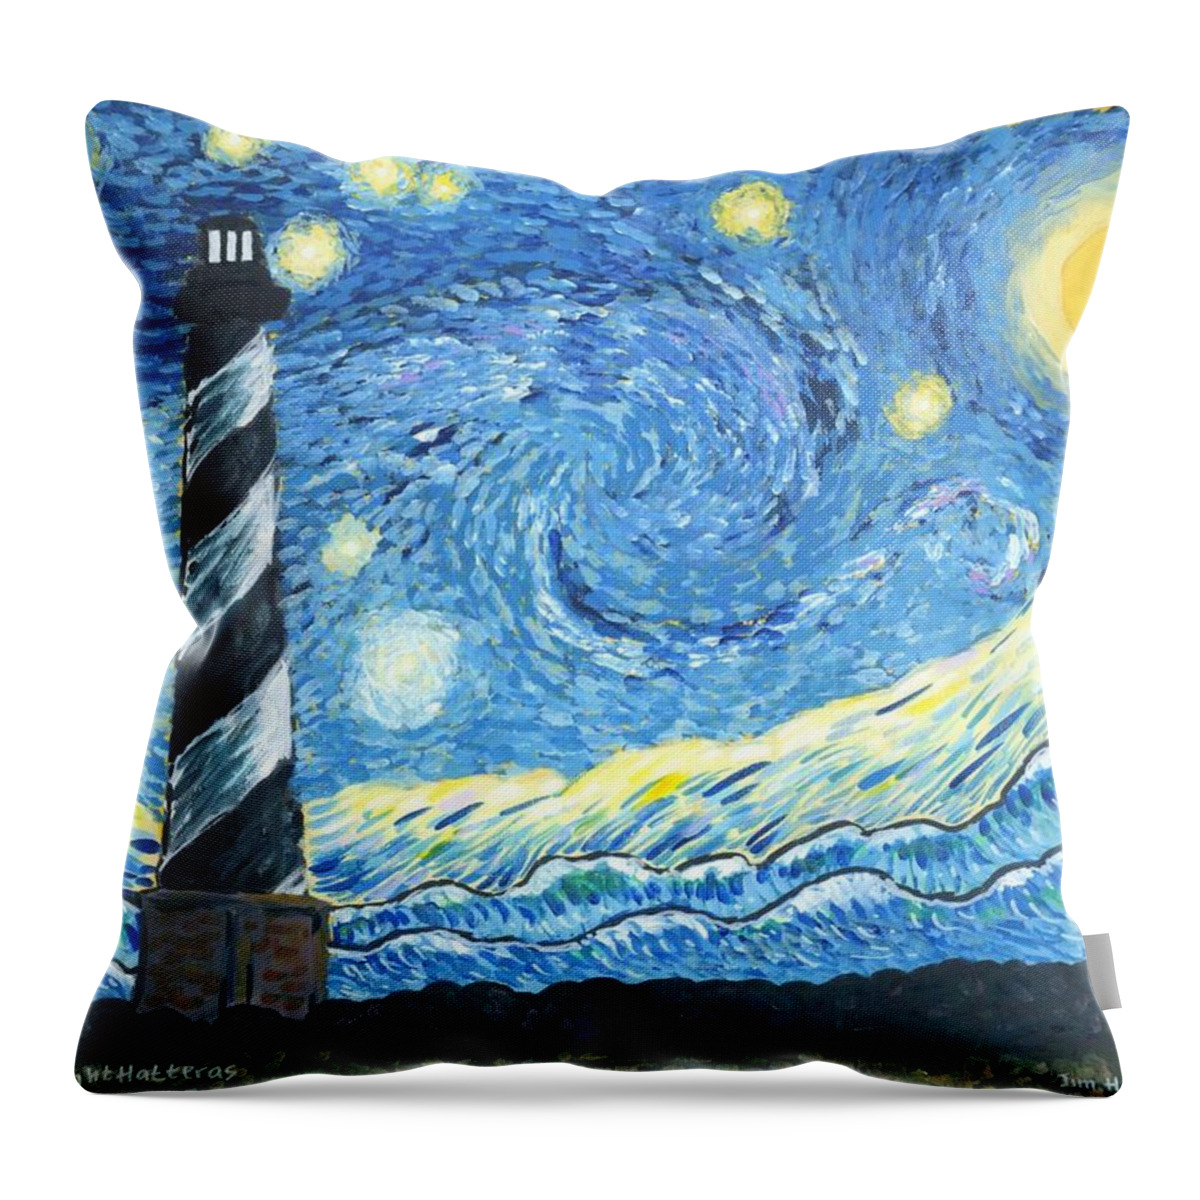 Hatteras Throw Pillow featuring the painting Starry Night Hatteras by Jim Harris